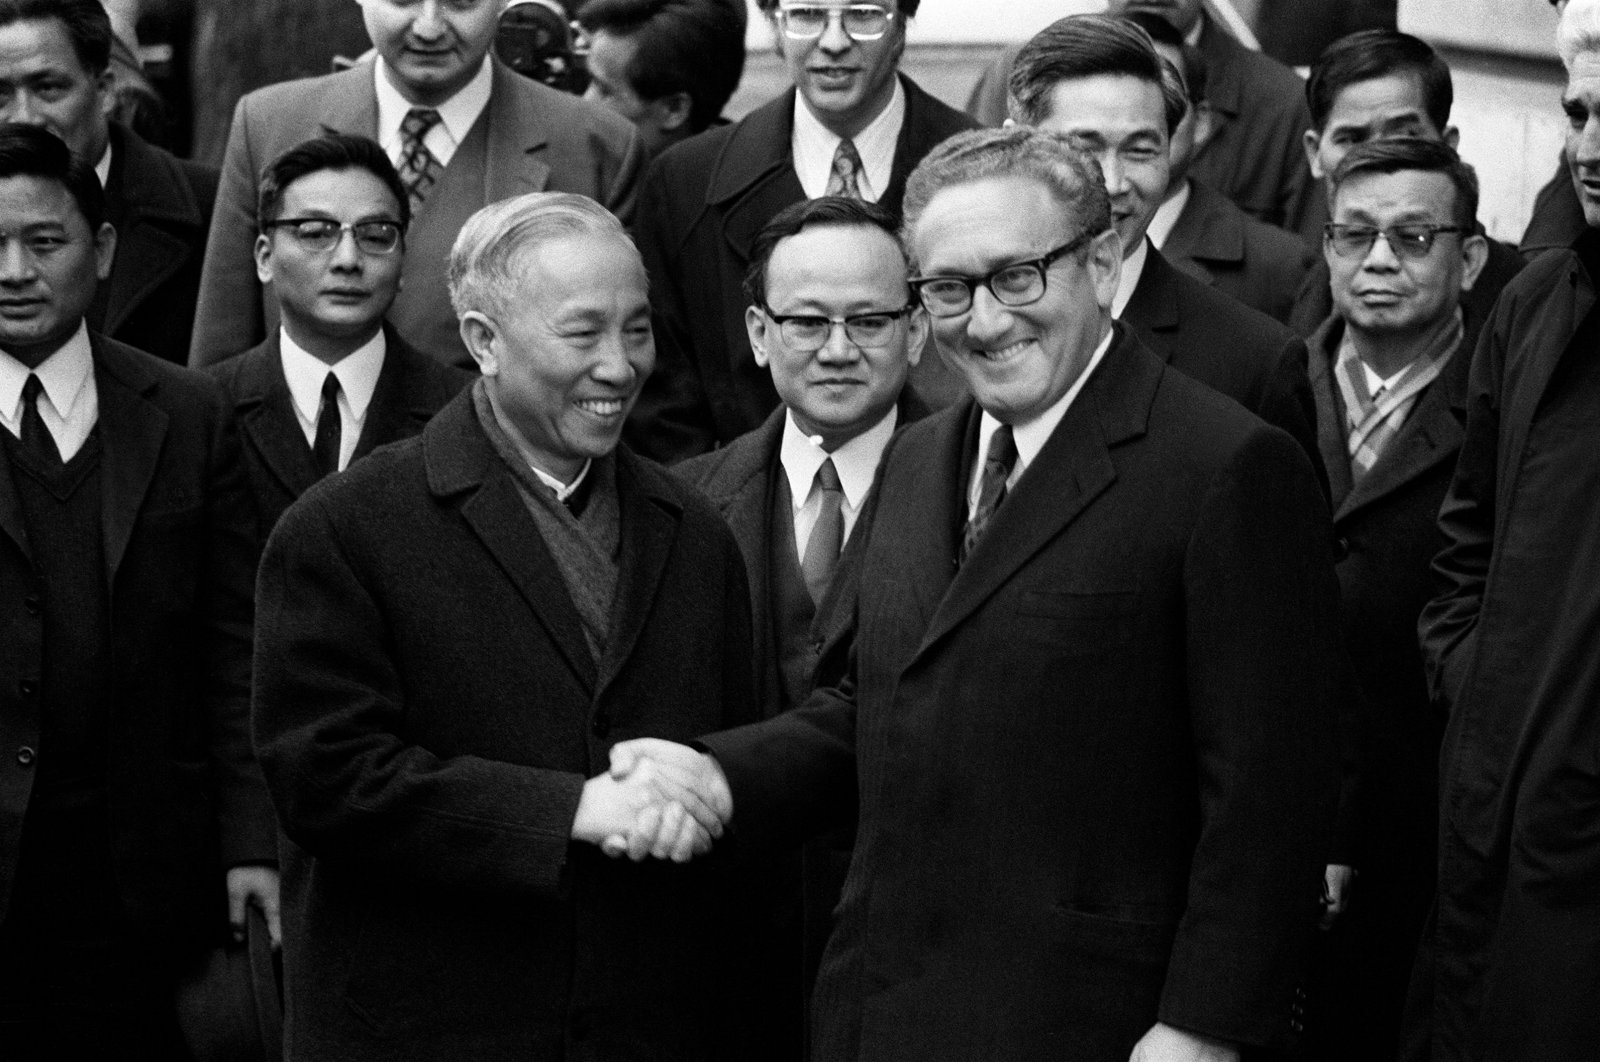 U.S. National Security Advisor Henry Kissinger (R) shakes hands with Le Duc Tho, leader of North Vietnam&#039;s delegation, after the signing of a cease-fire agreement in the Vietnam War, Paris, France, Jan. 23, 1973. (AFP Photo)